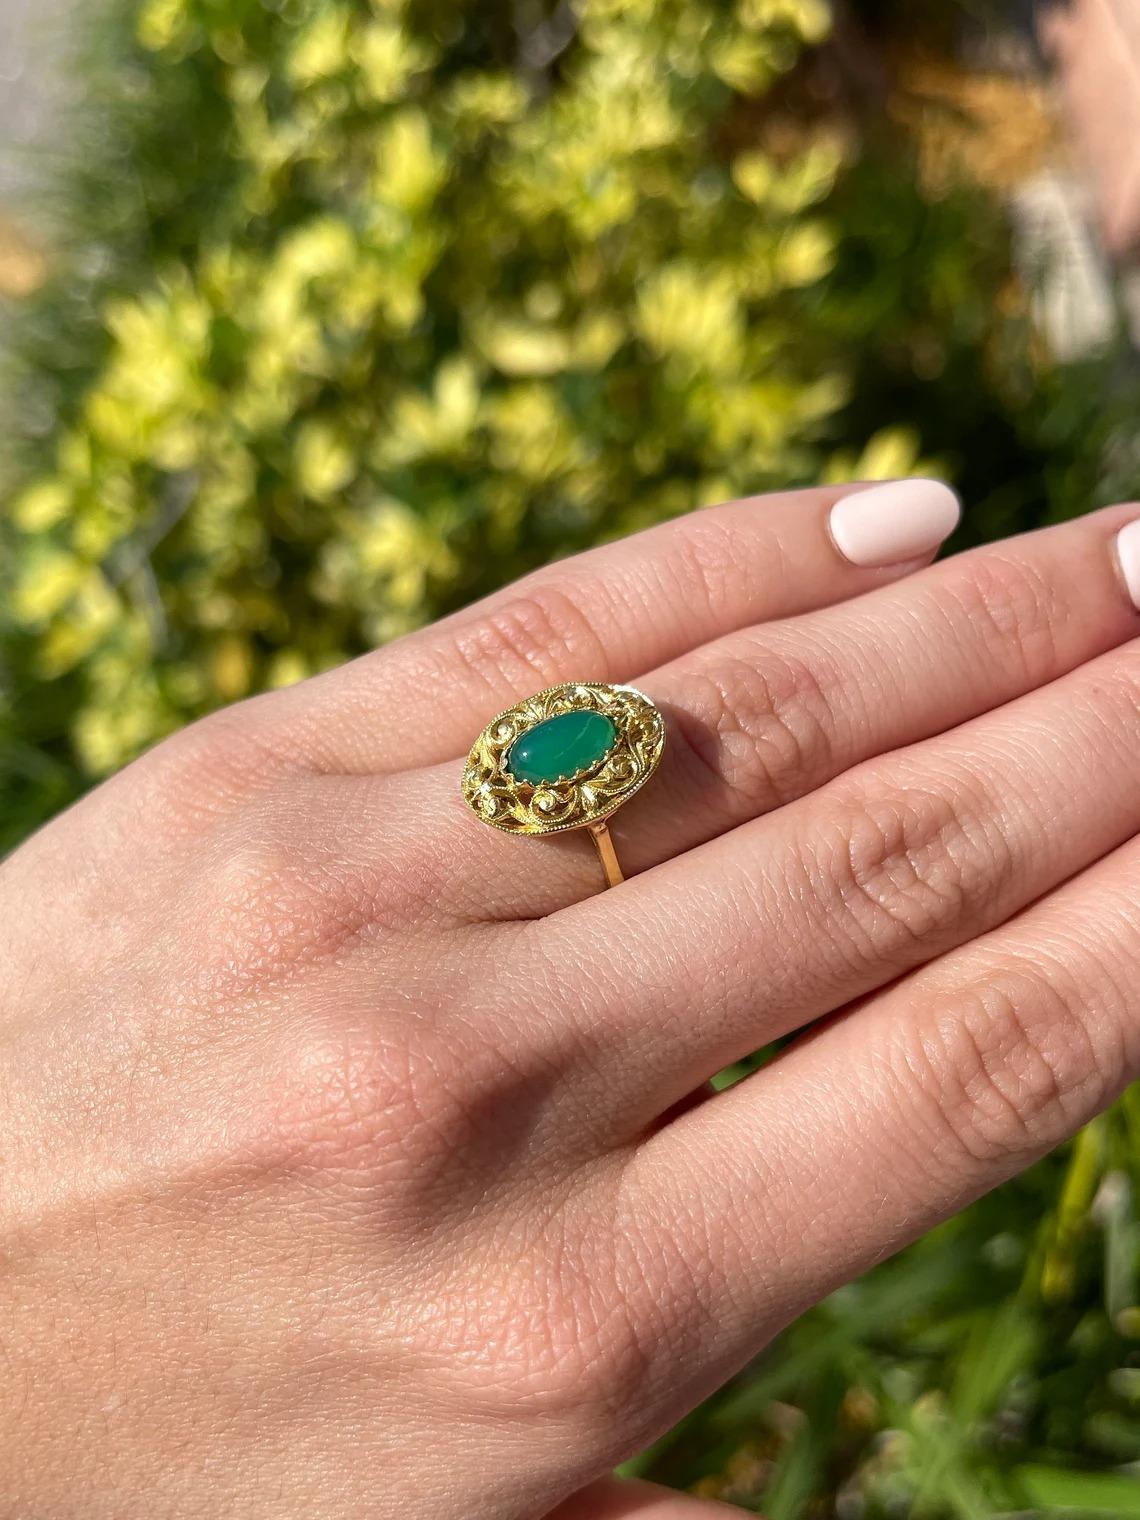 Handmade 2.03cts 18K Natural Green Cabochon Elongated Oval Floral Antique Ring In New Condition For Sale In Jupiter, FL